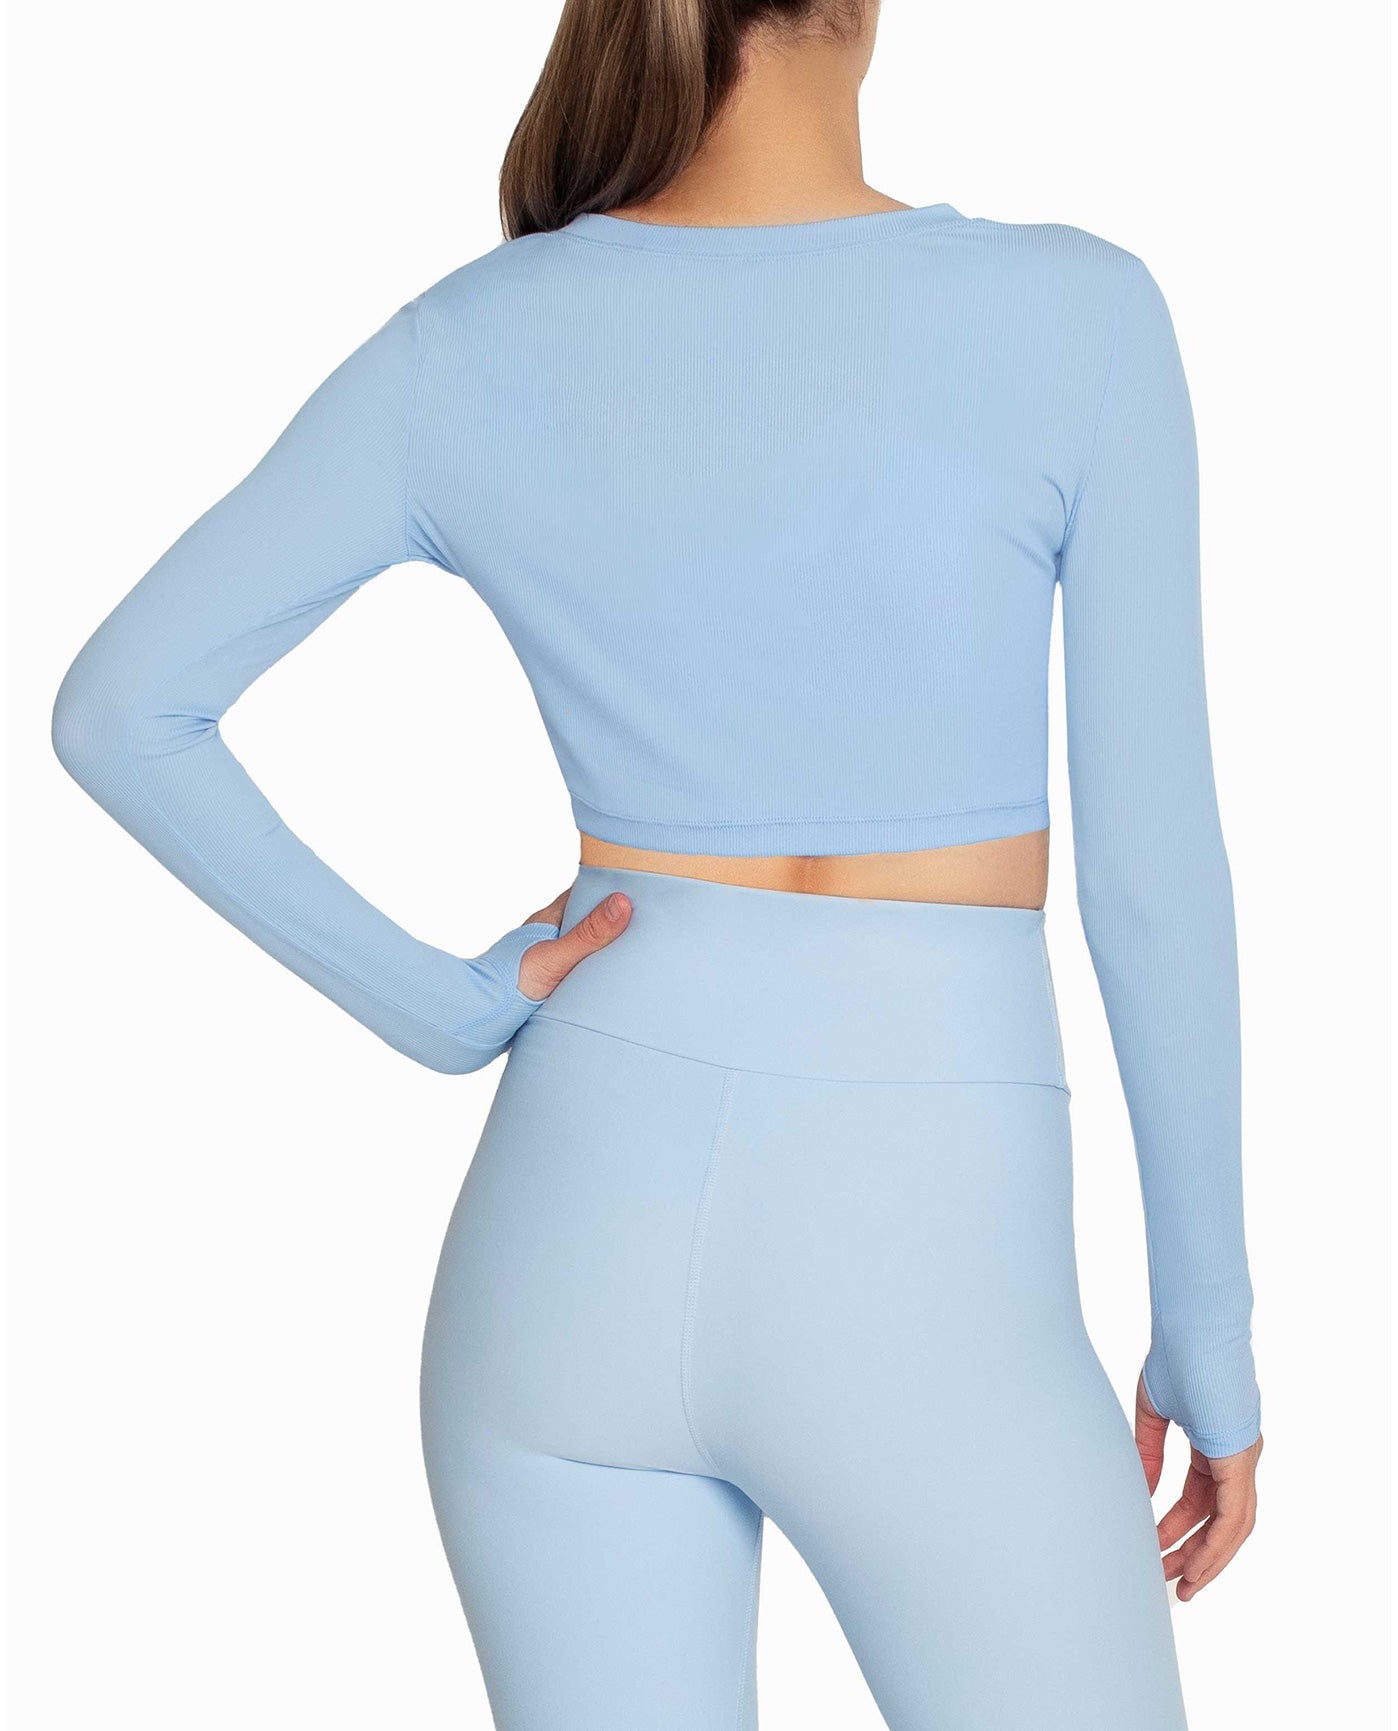 BACK OF CROPPED ACTIVE LONG SLEEVE TOP | WINDSURFER